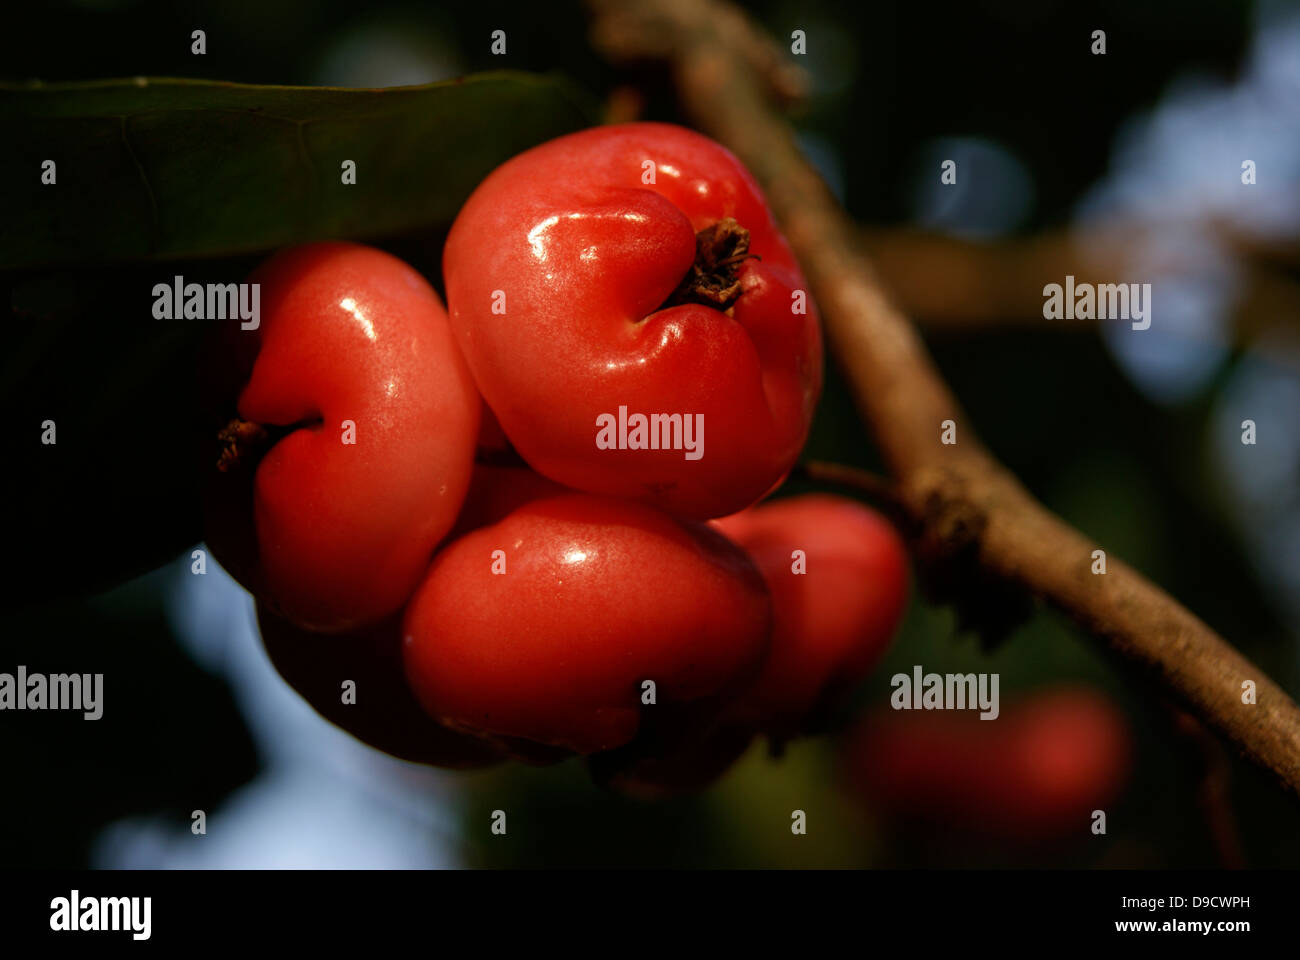 Rose Apple or Water Apples Fruits or chambakka on Syzygium jambos Tree in India Stock Photo